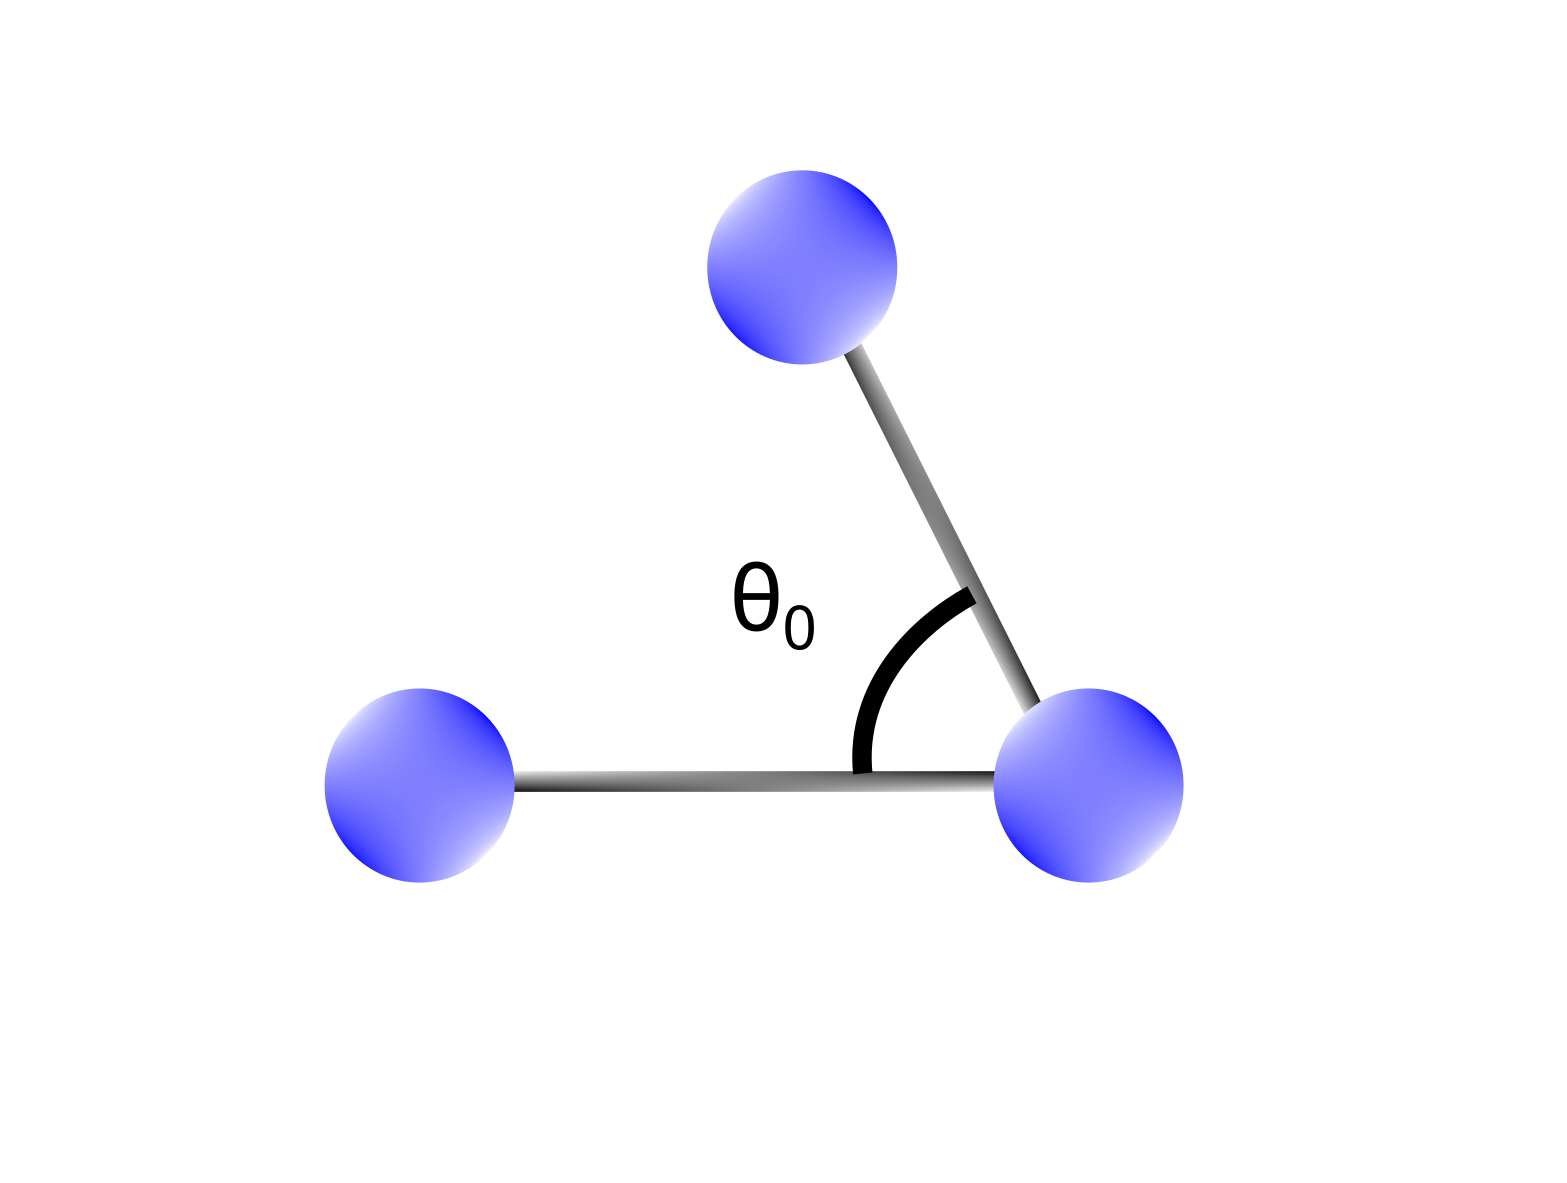 Illustration of bending interaction in a molecule (1-3 interaction)